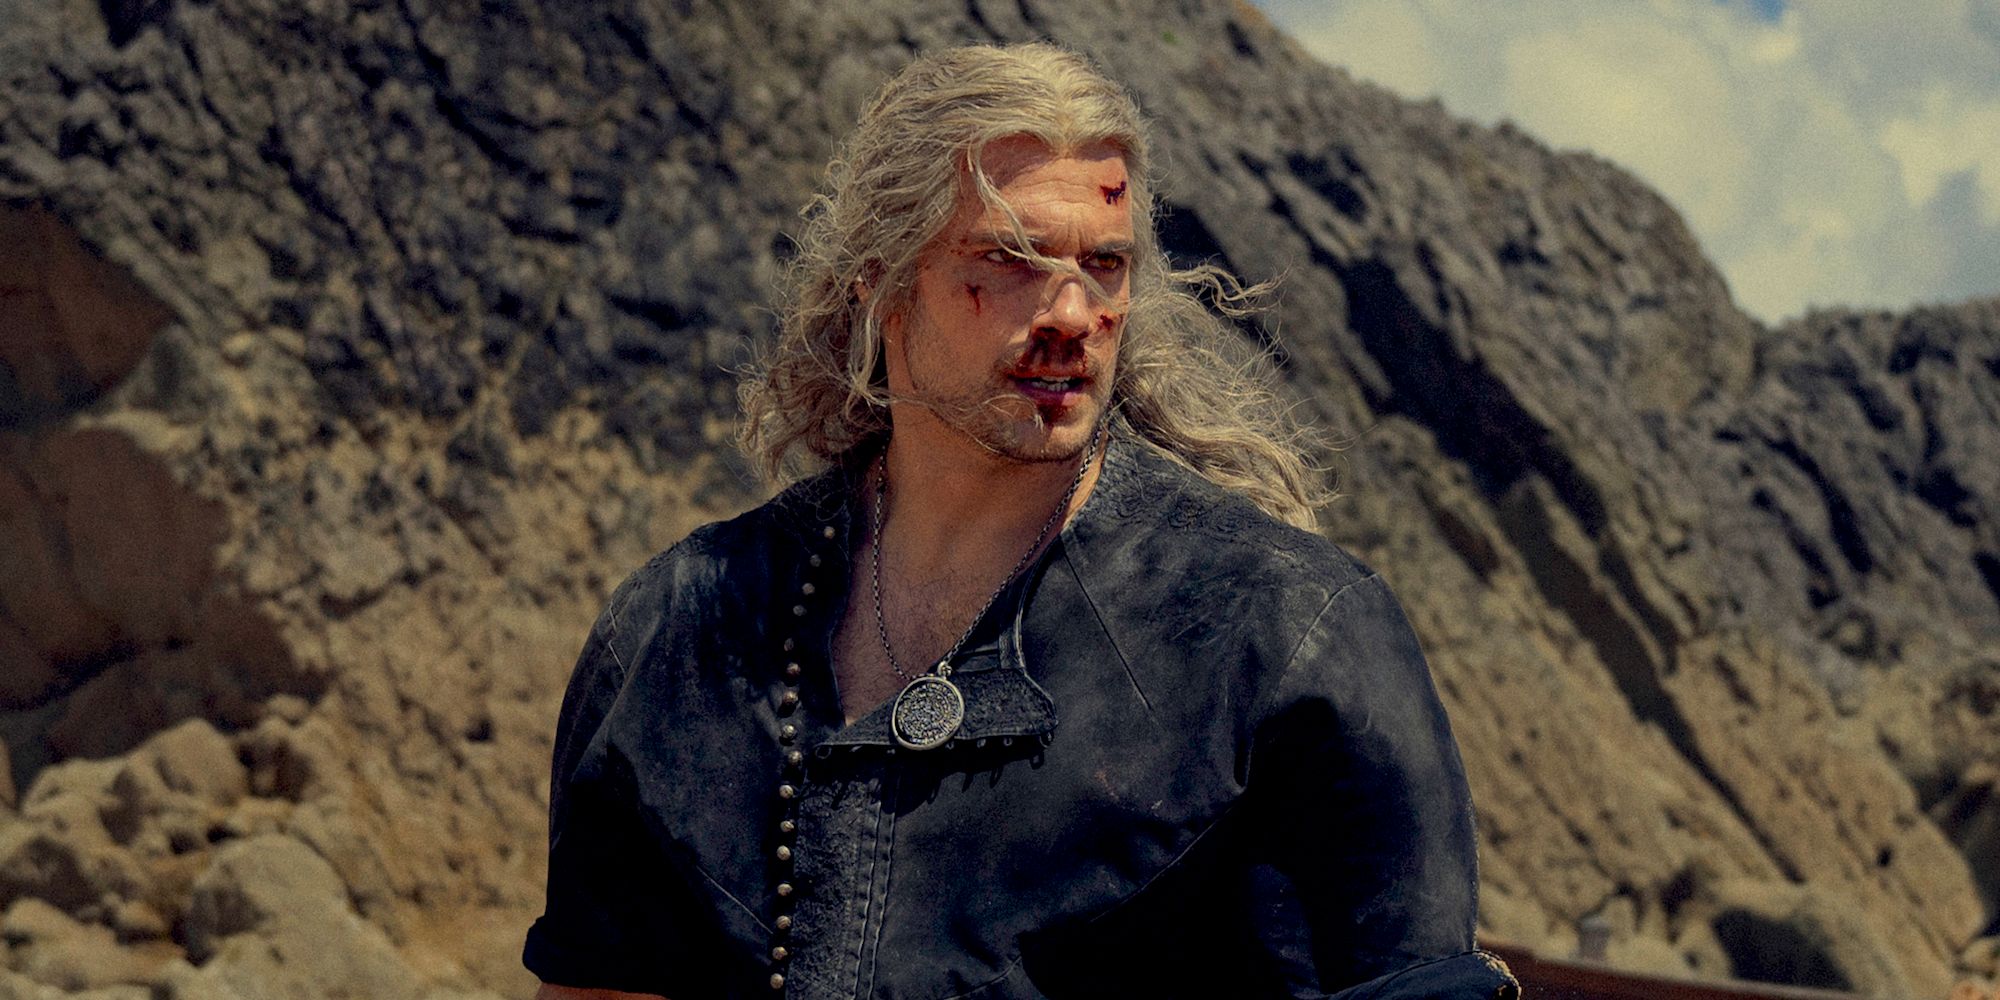 Henry Cavill as a Bloodied Geralt with hair in his face in The Witcher Season 3 Part 2